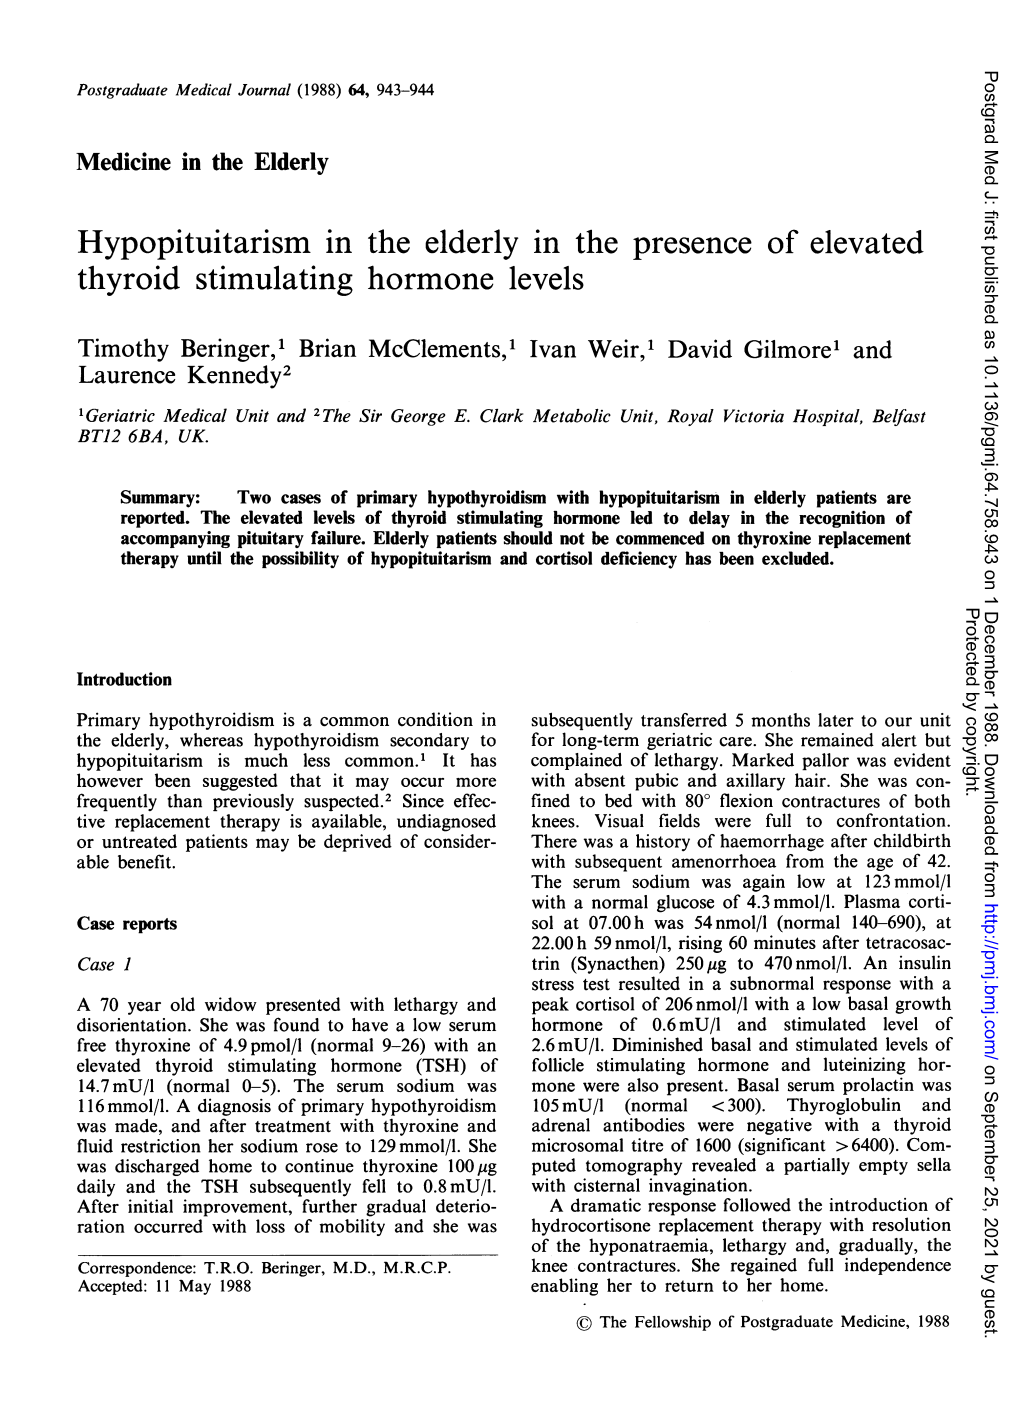 Hypopituitarism in the Elderly in the Presence of Elevated Thyroid Stimulating Hormone Levels